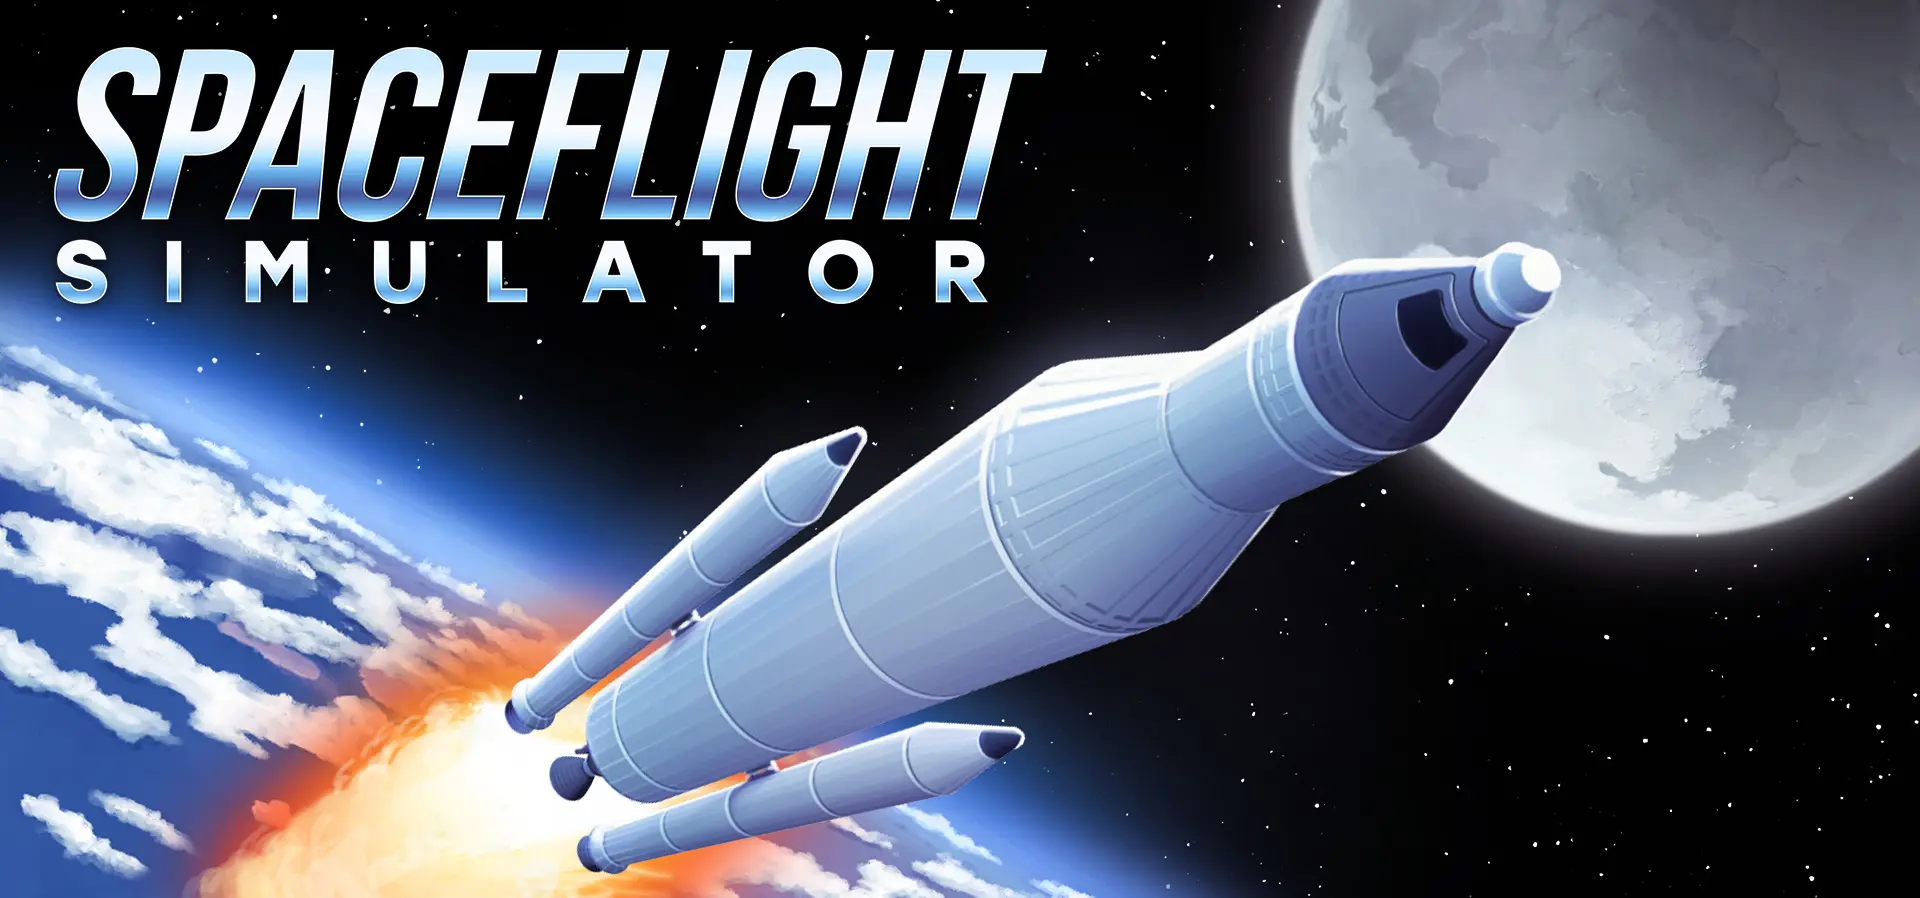 The Spaceflight Simulator banner, a cartoon-style rocket taking off above the Earth